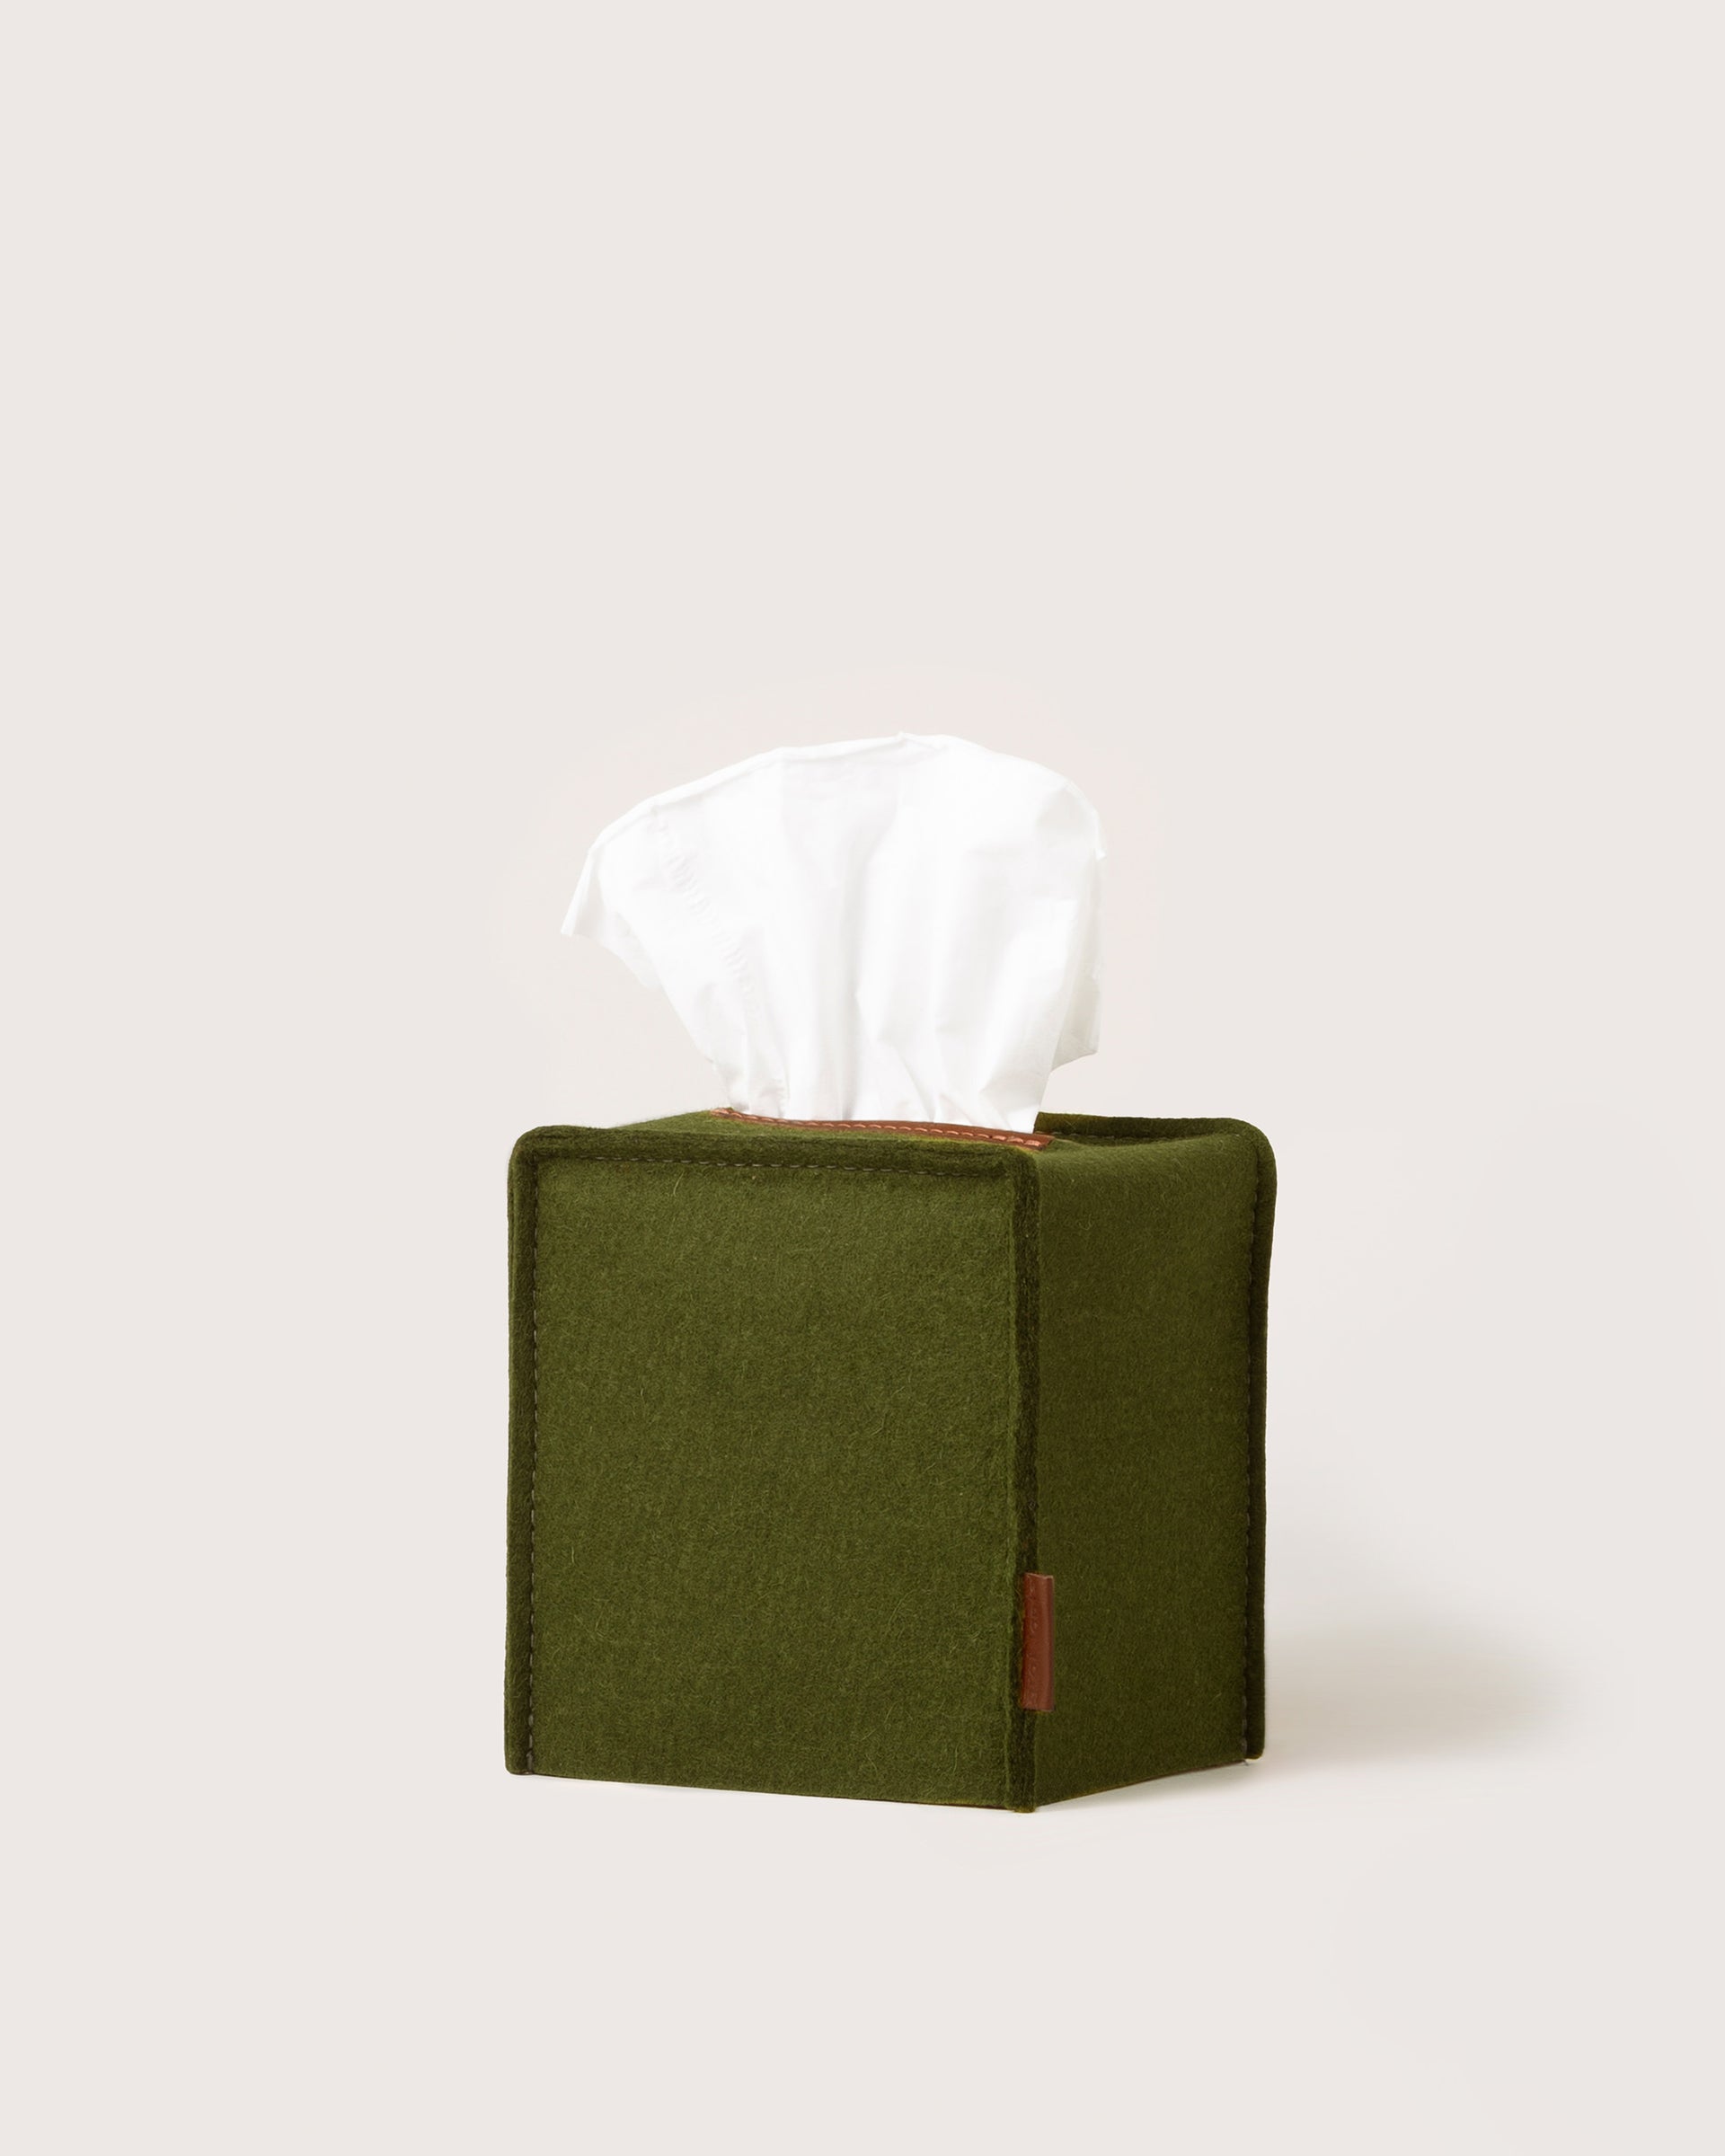 A square Merino Wool Felt Tissue Box Cover in color Moss Sienna by Graf Lantz, white background